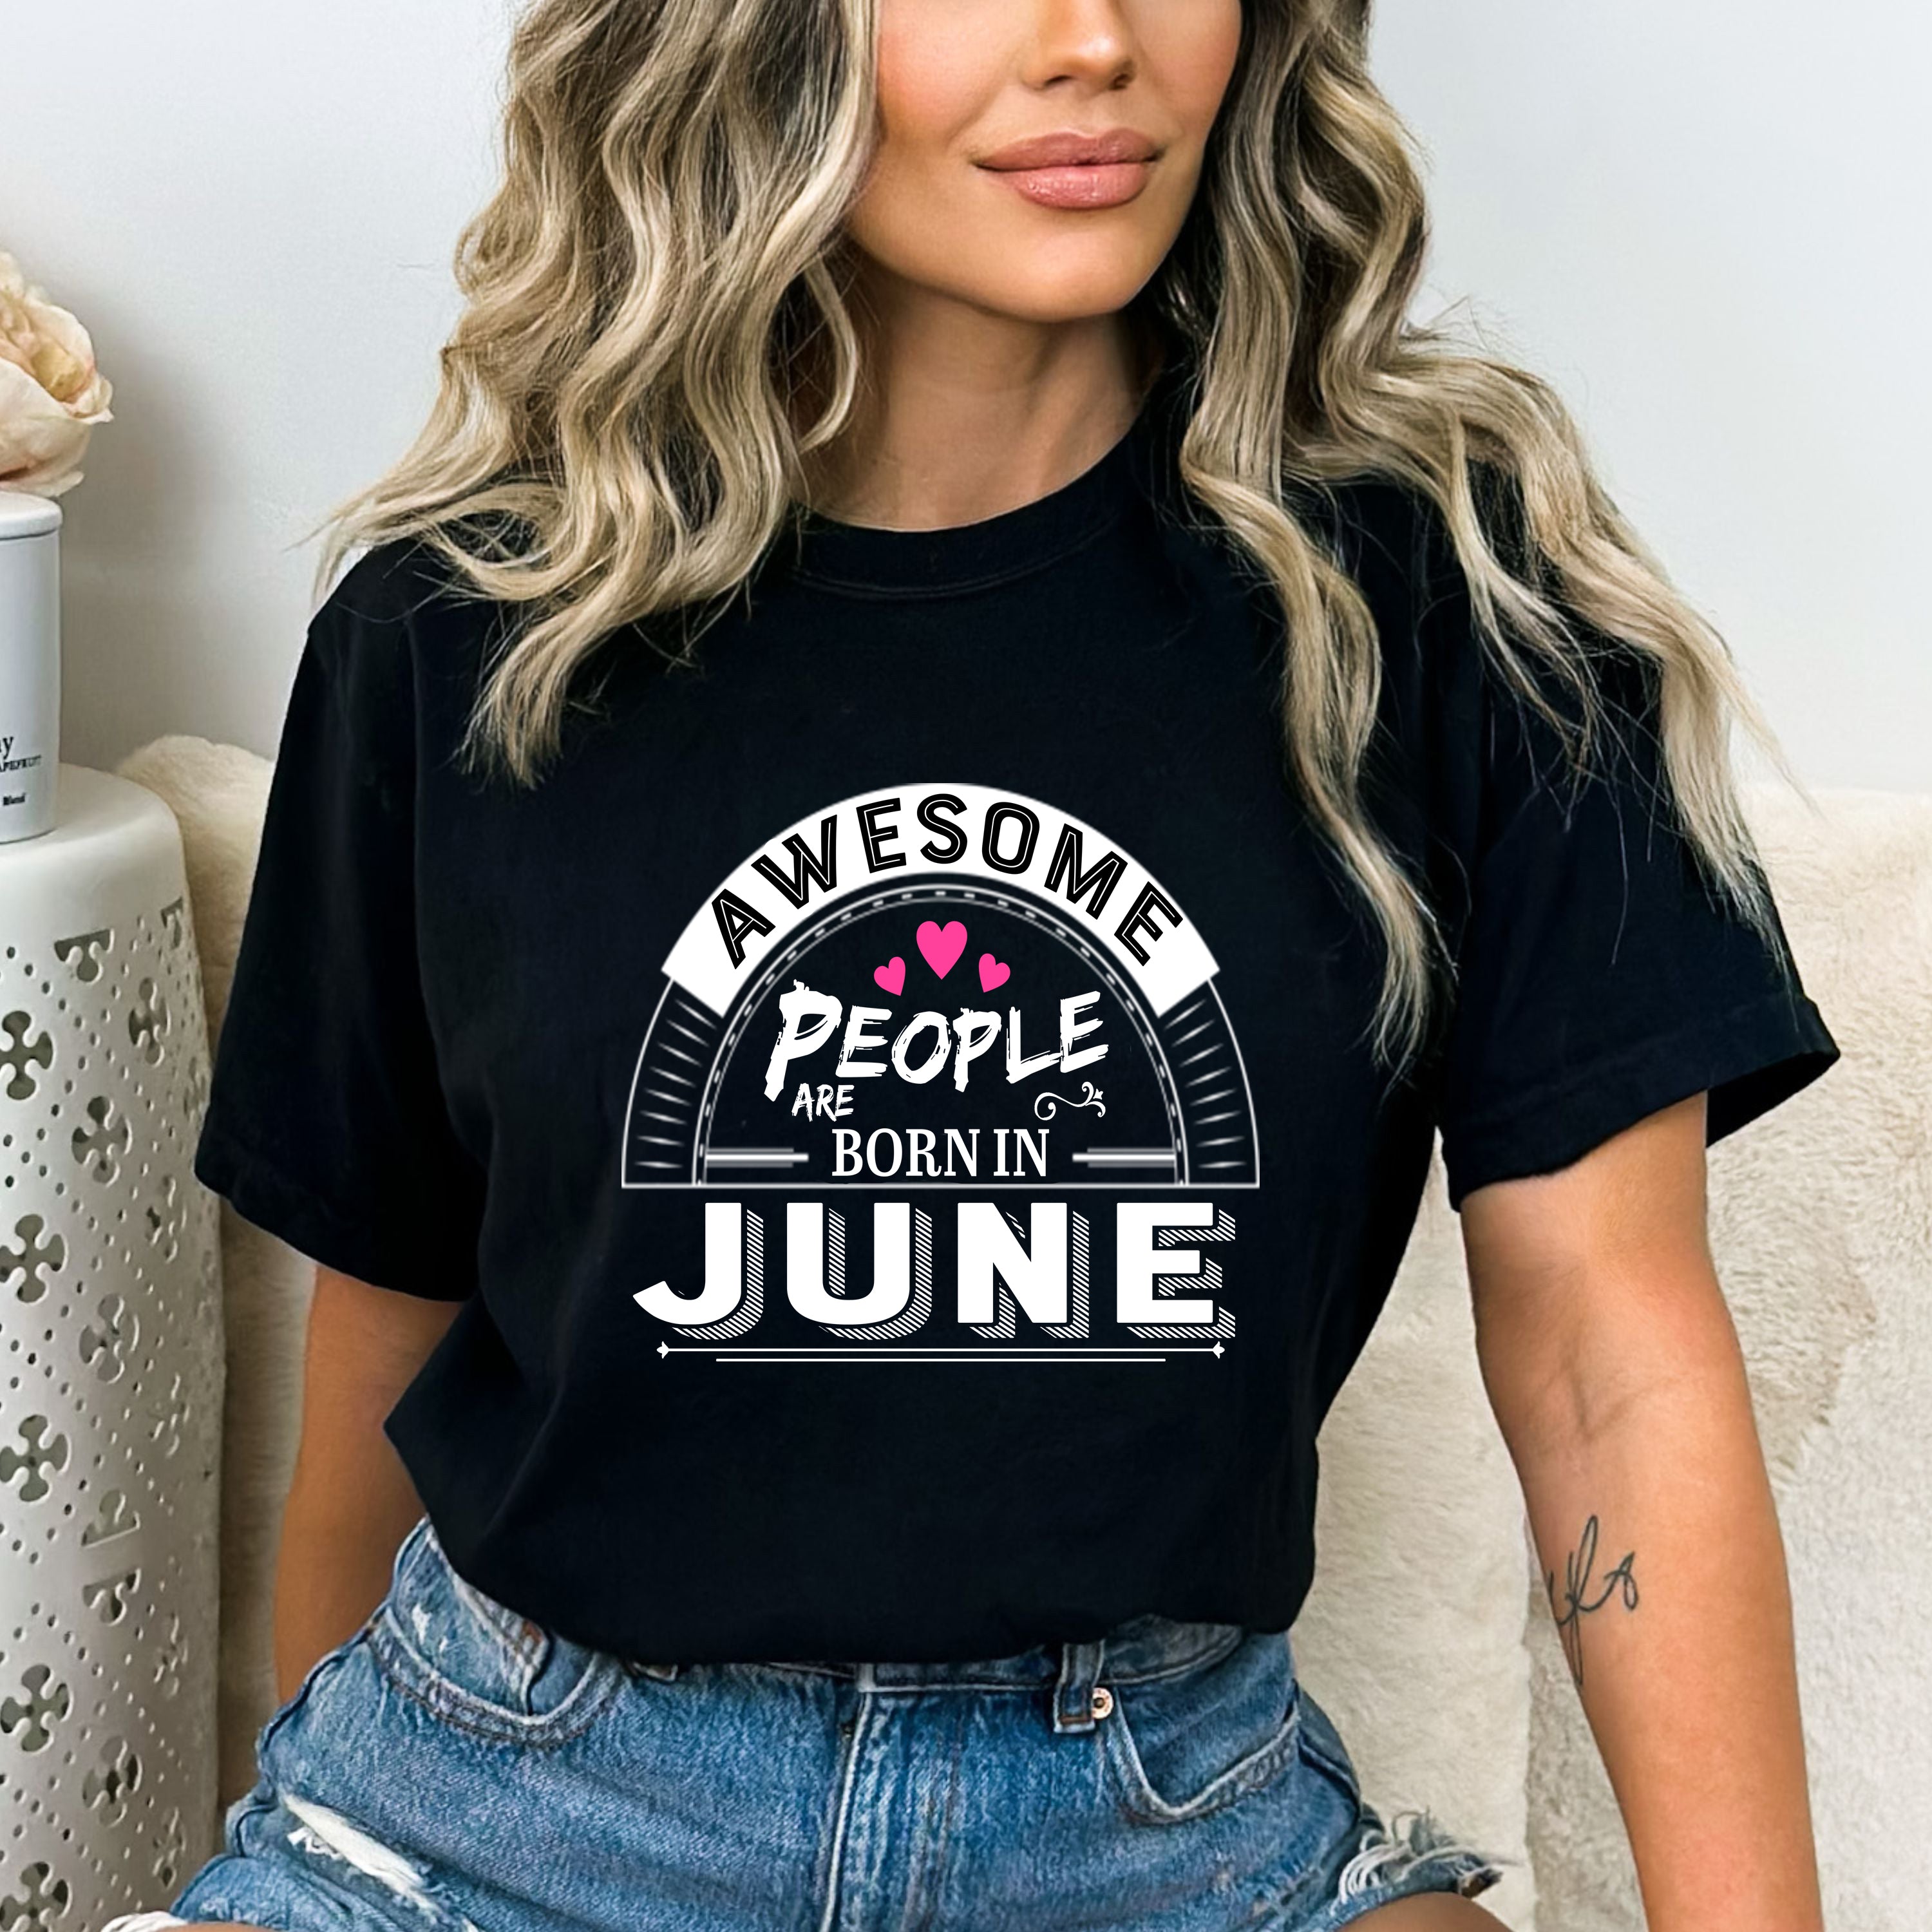 "Awesome People Are Born In June"